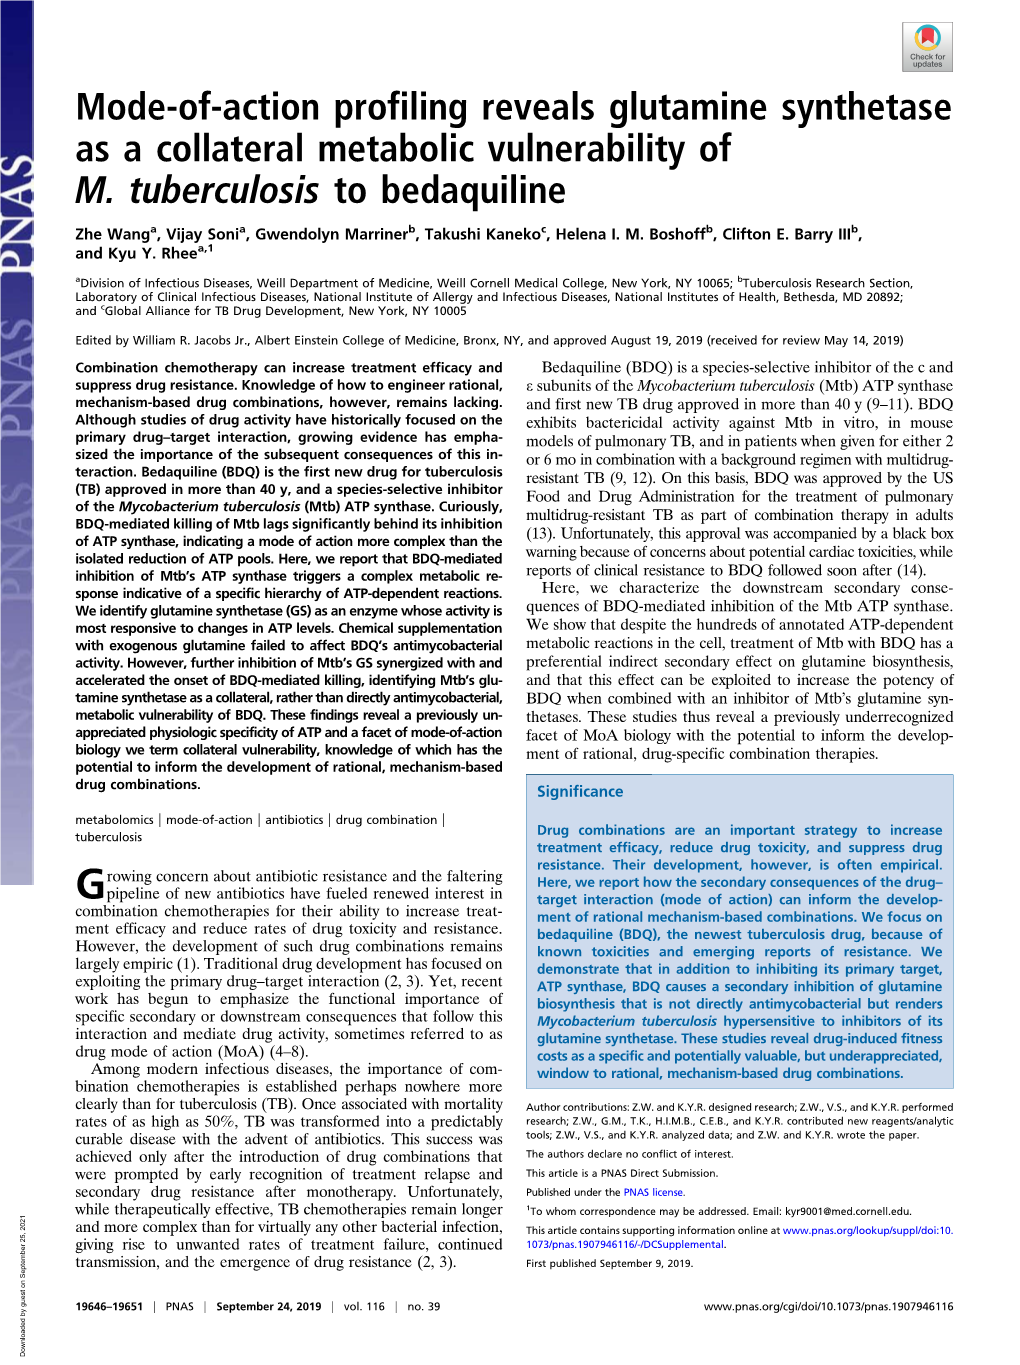 Mode-Of-Action Profiling Reveals Glutamine Synthetase As a Collateral Metabolic Vulnerability of M. Tuberculosis to Bedaquiline